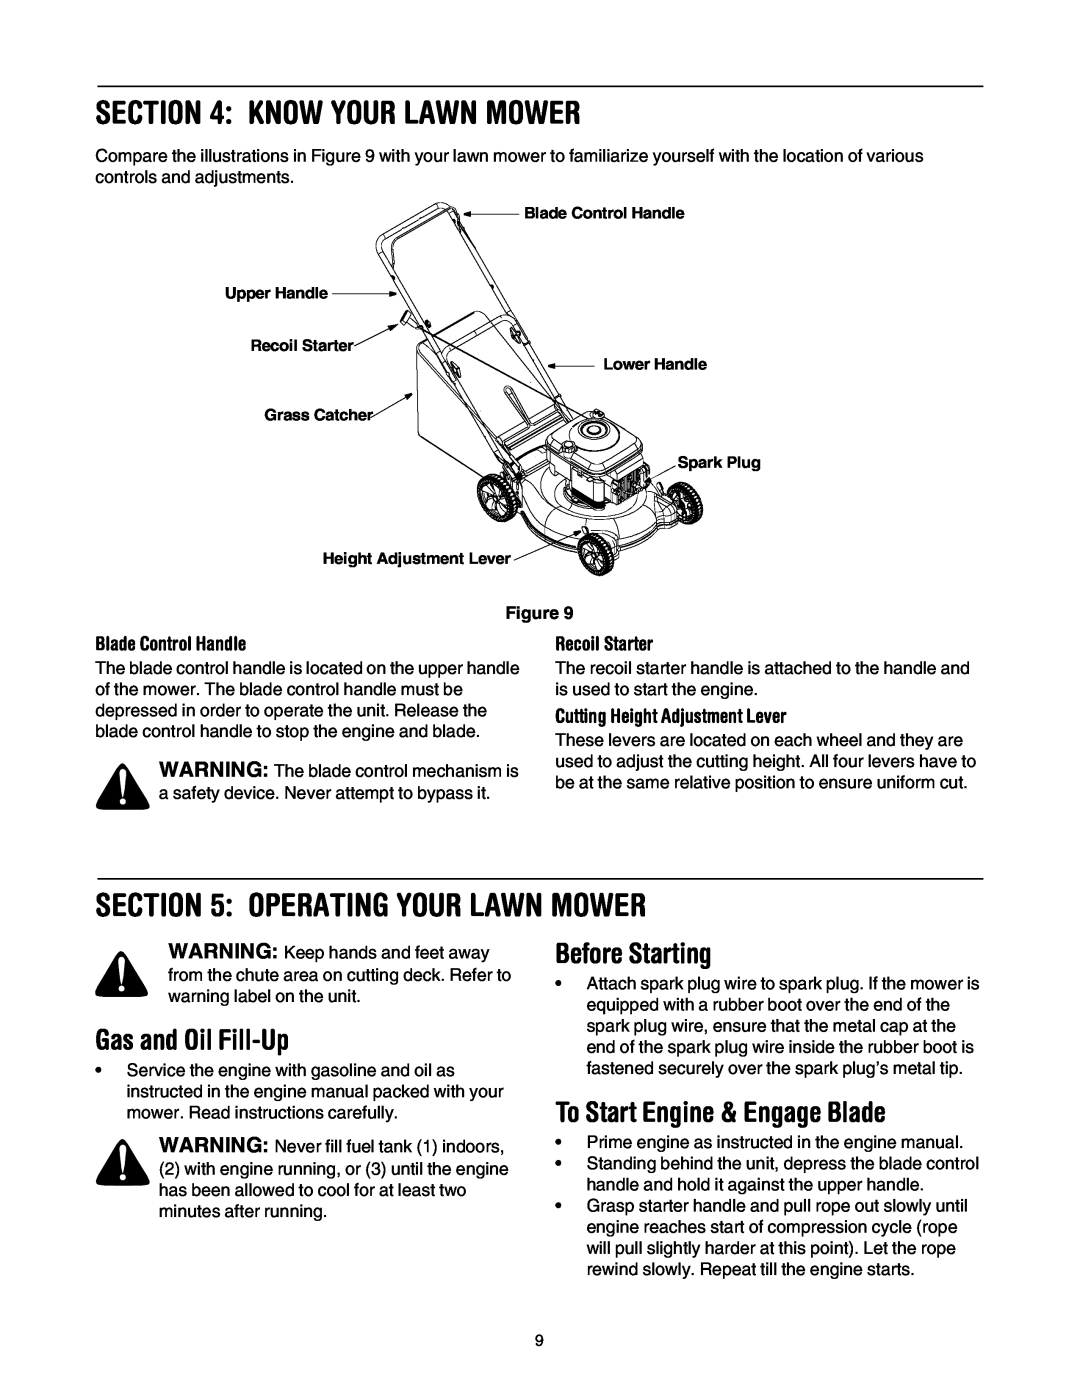 Bolens 416 Know Your Lawn Mower, Operating Your Lawn Mower, Gas and Oil Fill-Up, Before Starting, Blade Control Handle 